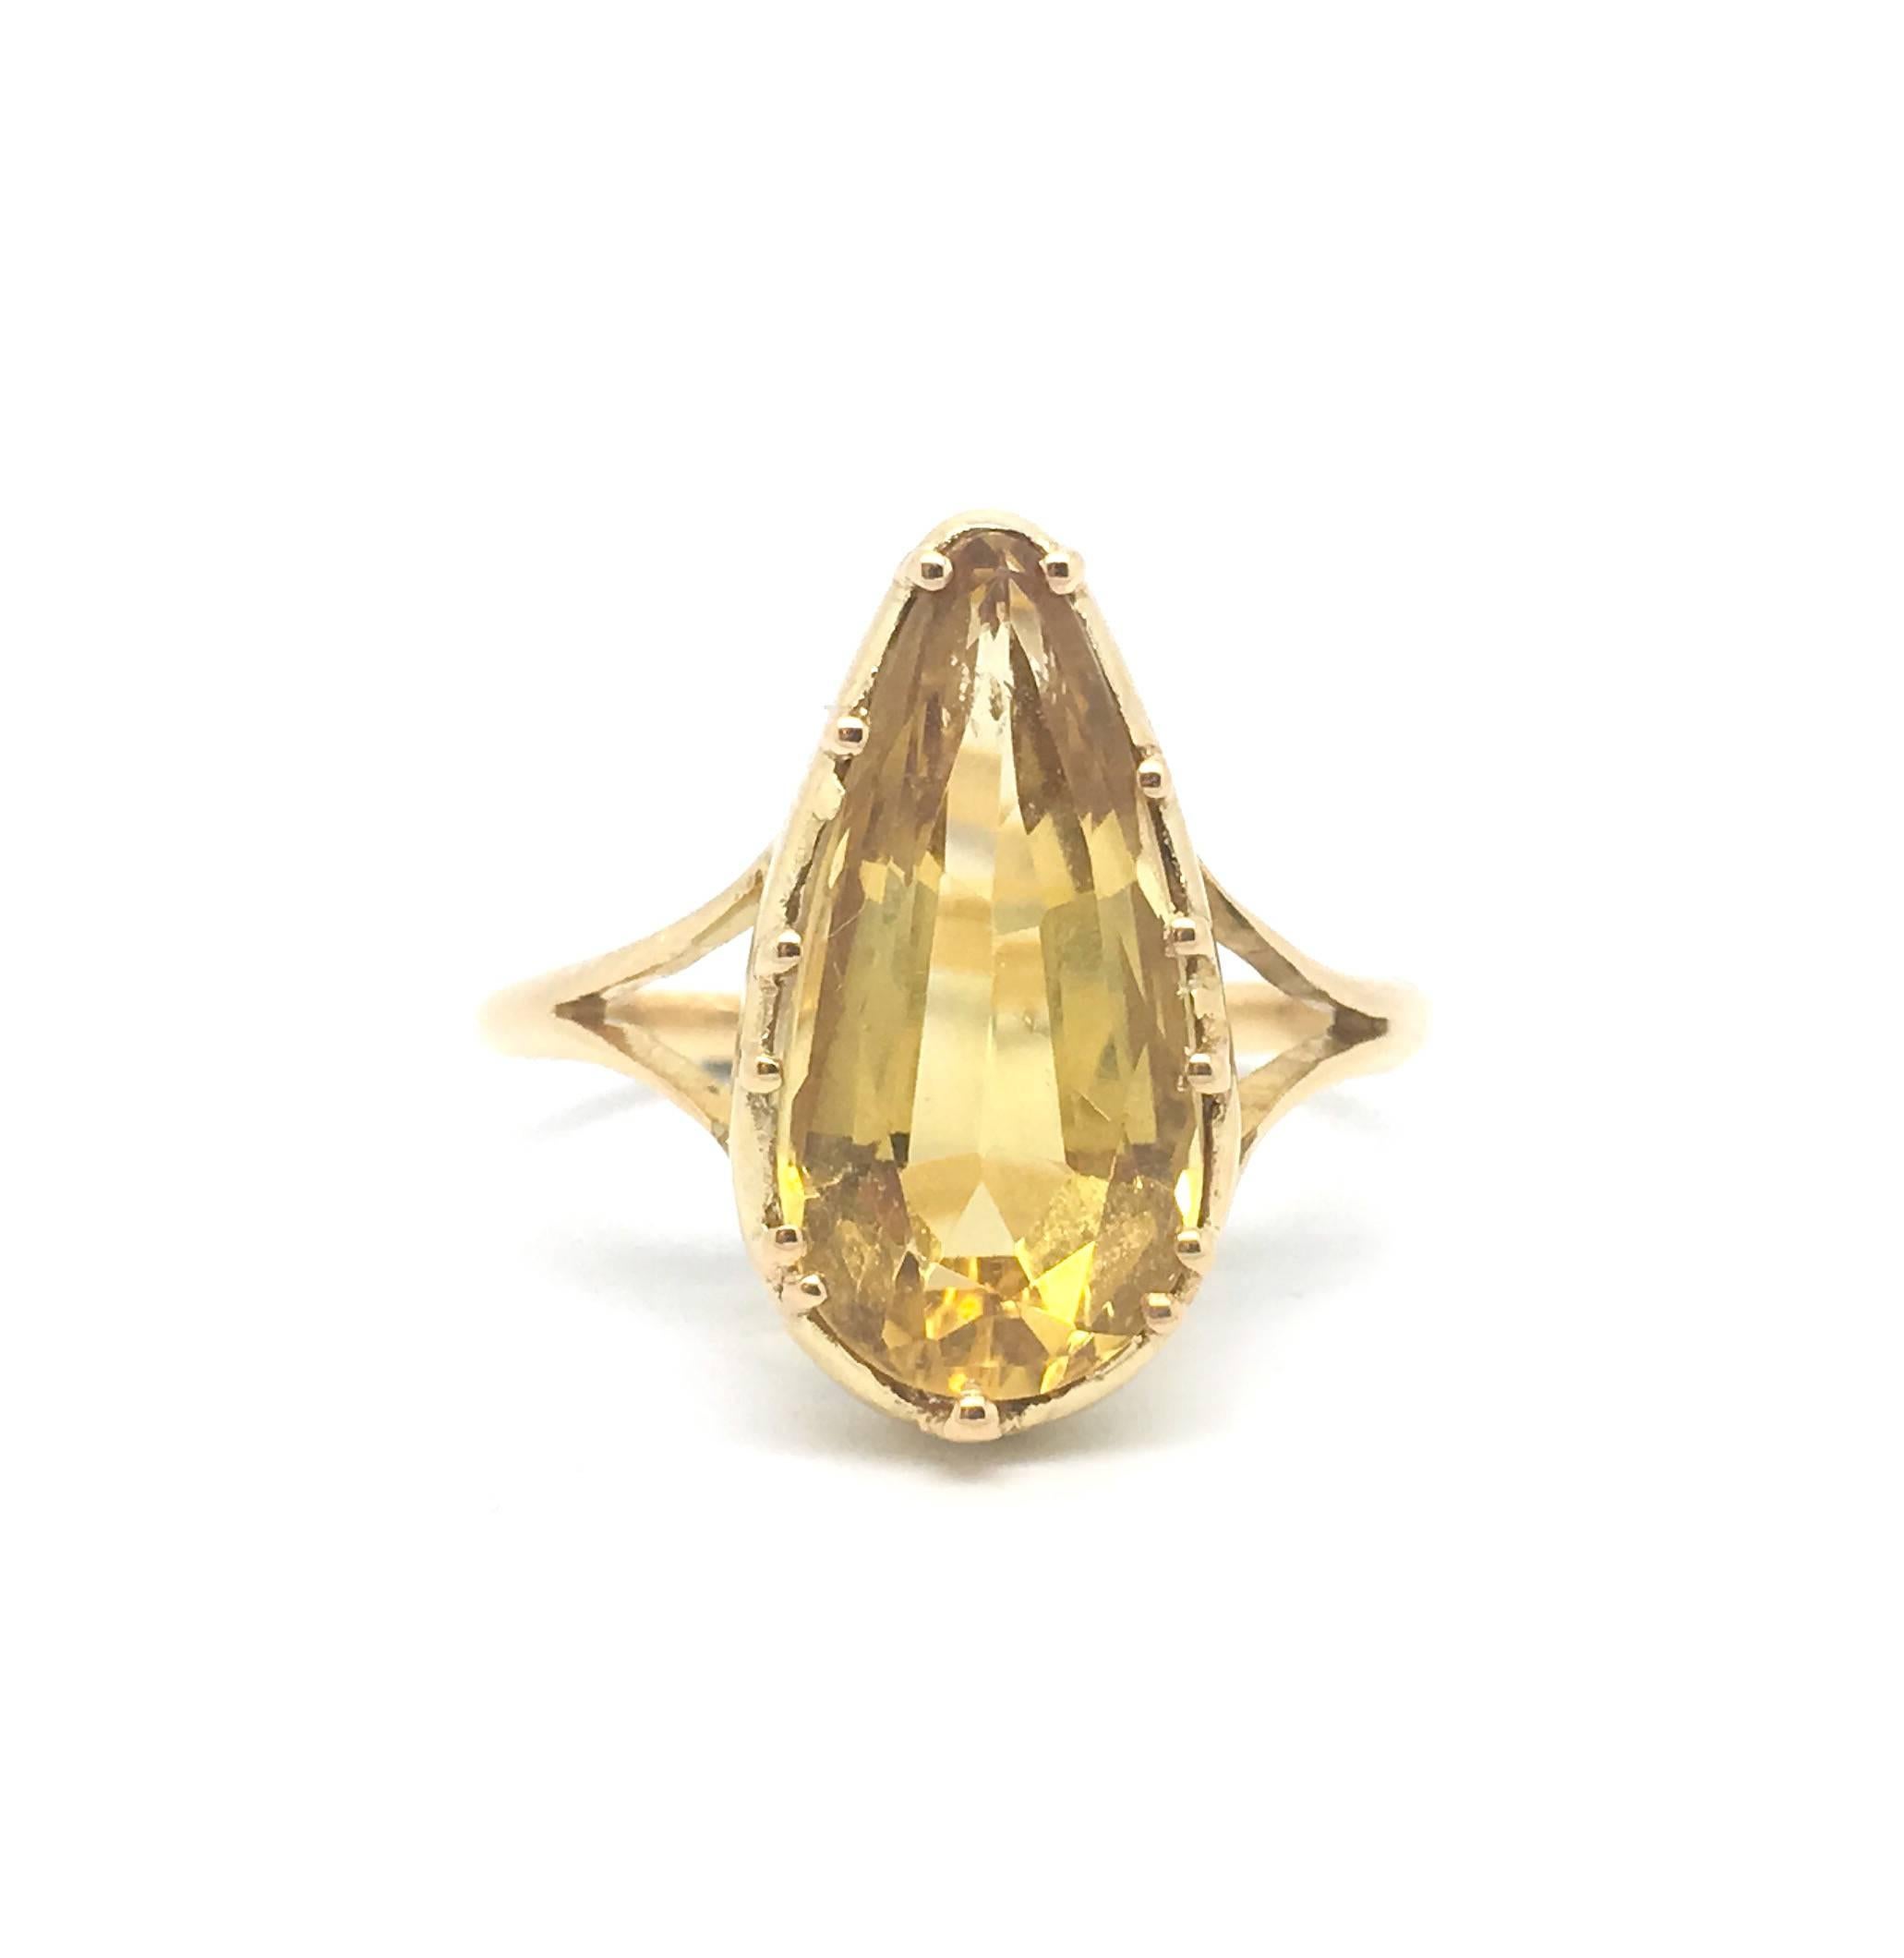 A Georgian style pear shaped citrine ring. Created towards the end of the Victorian era in the Georgian style.

The large citrine mounted in yellow gold with twist shoulders. 

UK size R

US size 8 5/8

Citrine is 16 x 9mm.